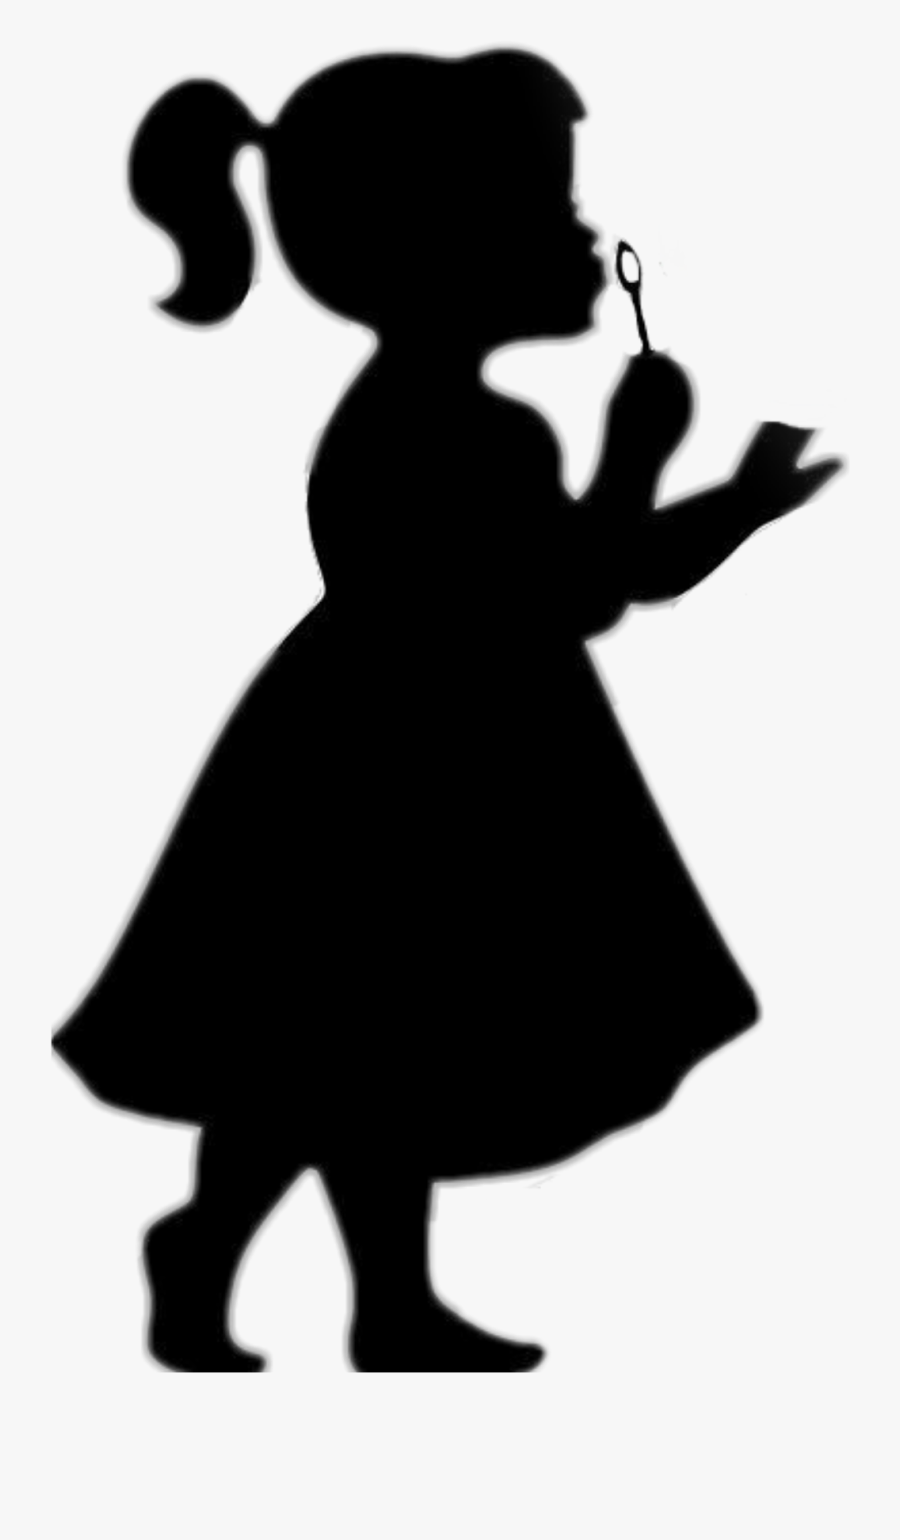 Baby Girl Silhouette Png, Transparent Clipart